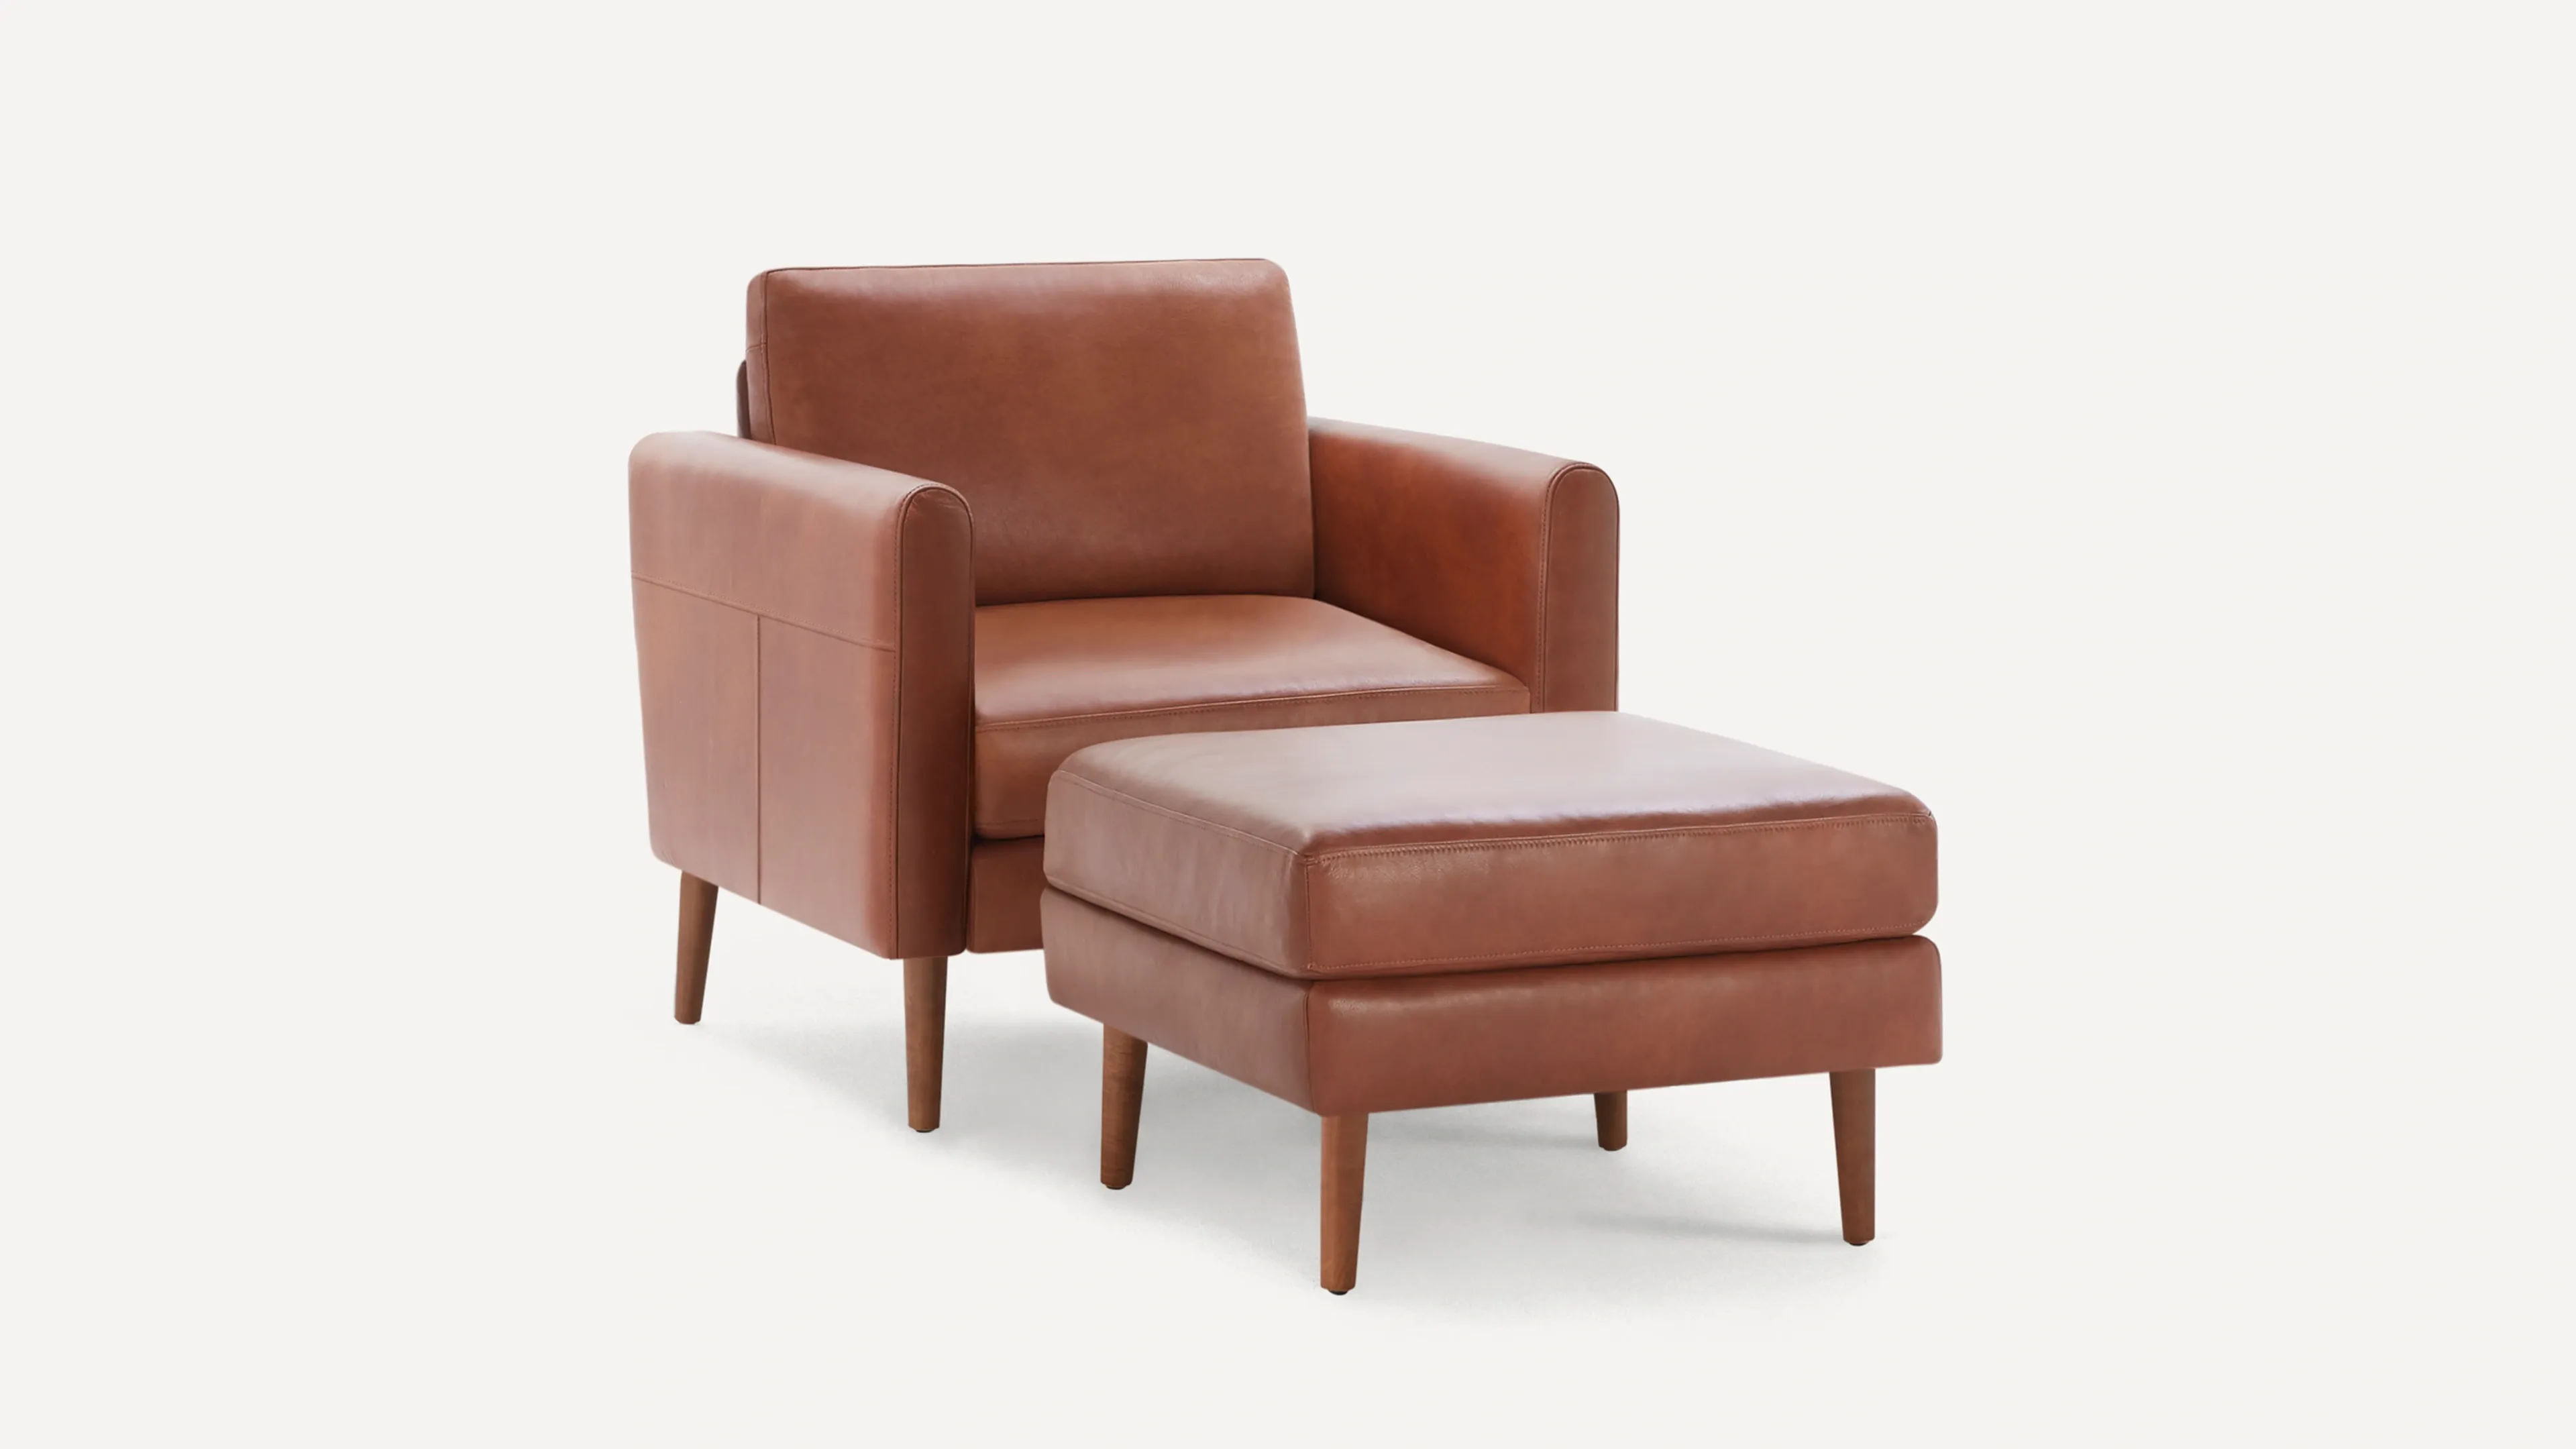 Original Armchair with Ottoman in Chestnut Leather